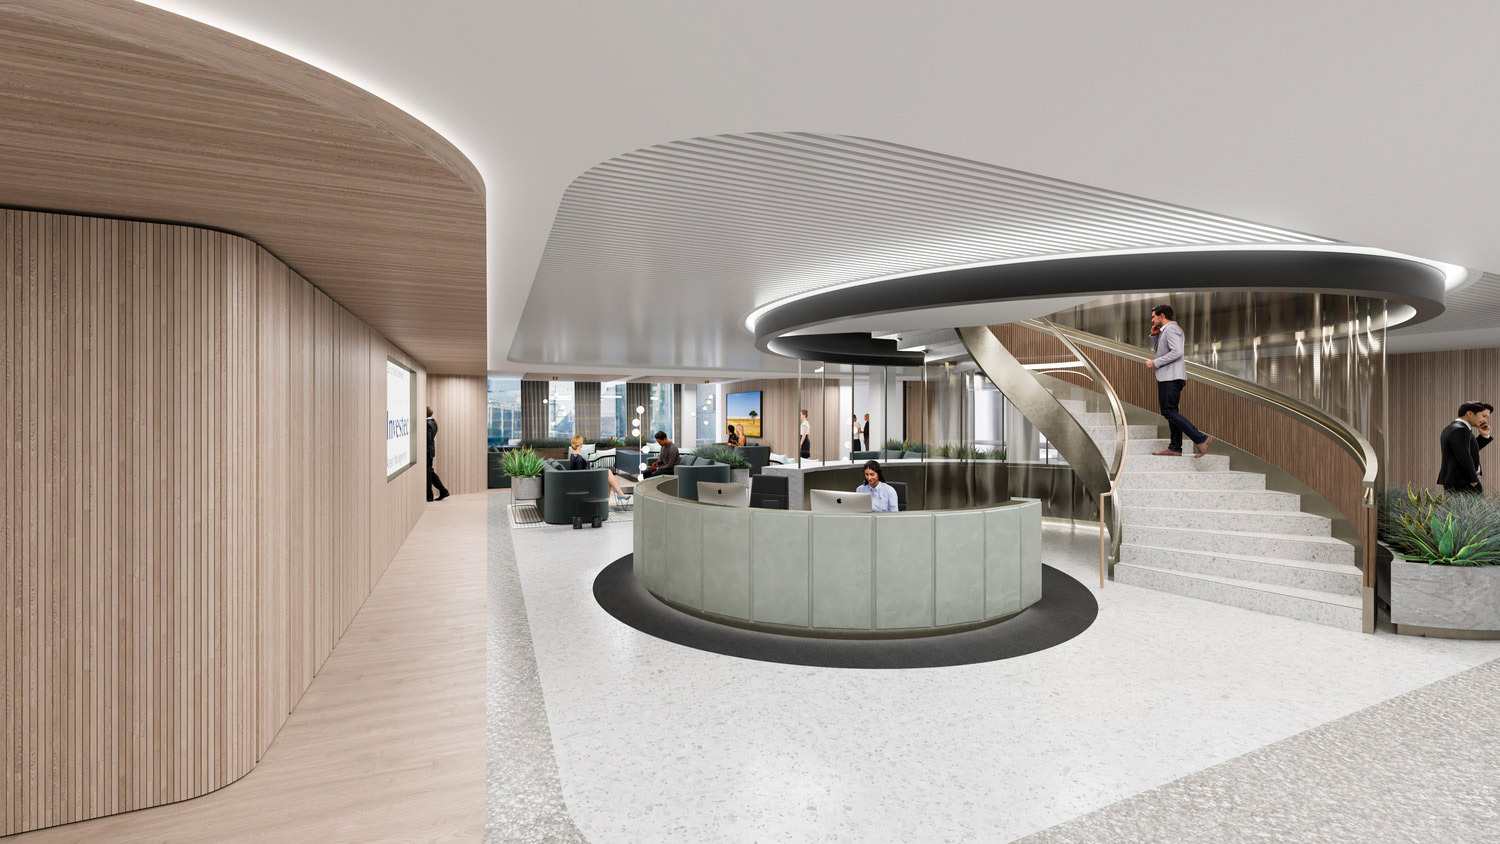 Modern office lobby rendering with a sweeping spiral staircase as its centerpiece. Wood-paneled curved walls contrast with the textured gray ceiling. Sleek seating areas with occupants are arranged under soft lighting, creating a welcoming atmosphere. Green plants add a touch of natural warmth.